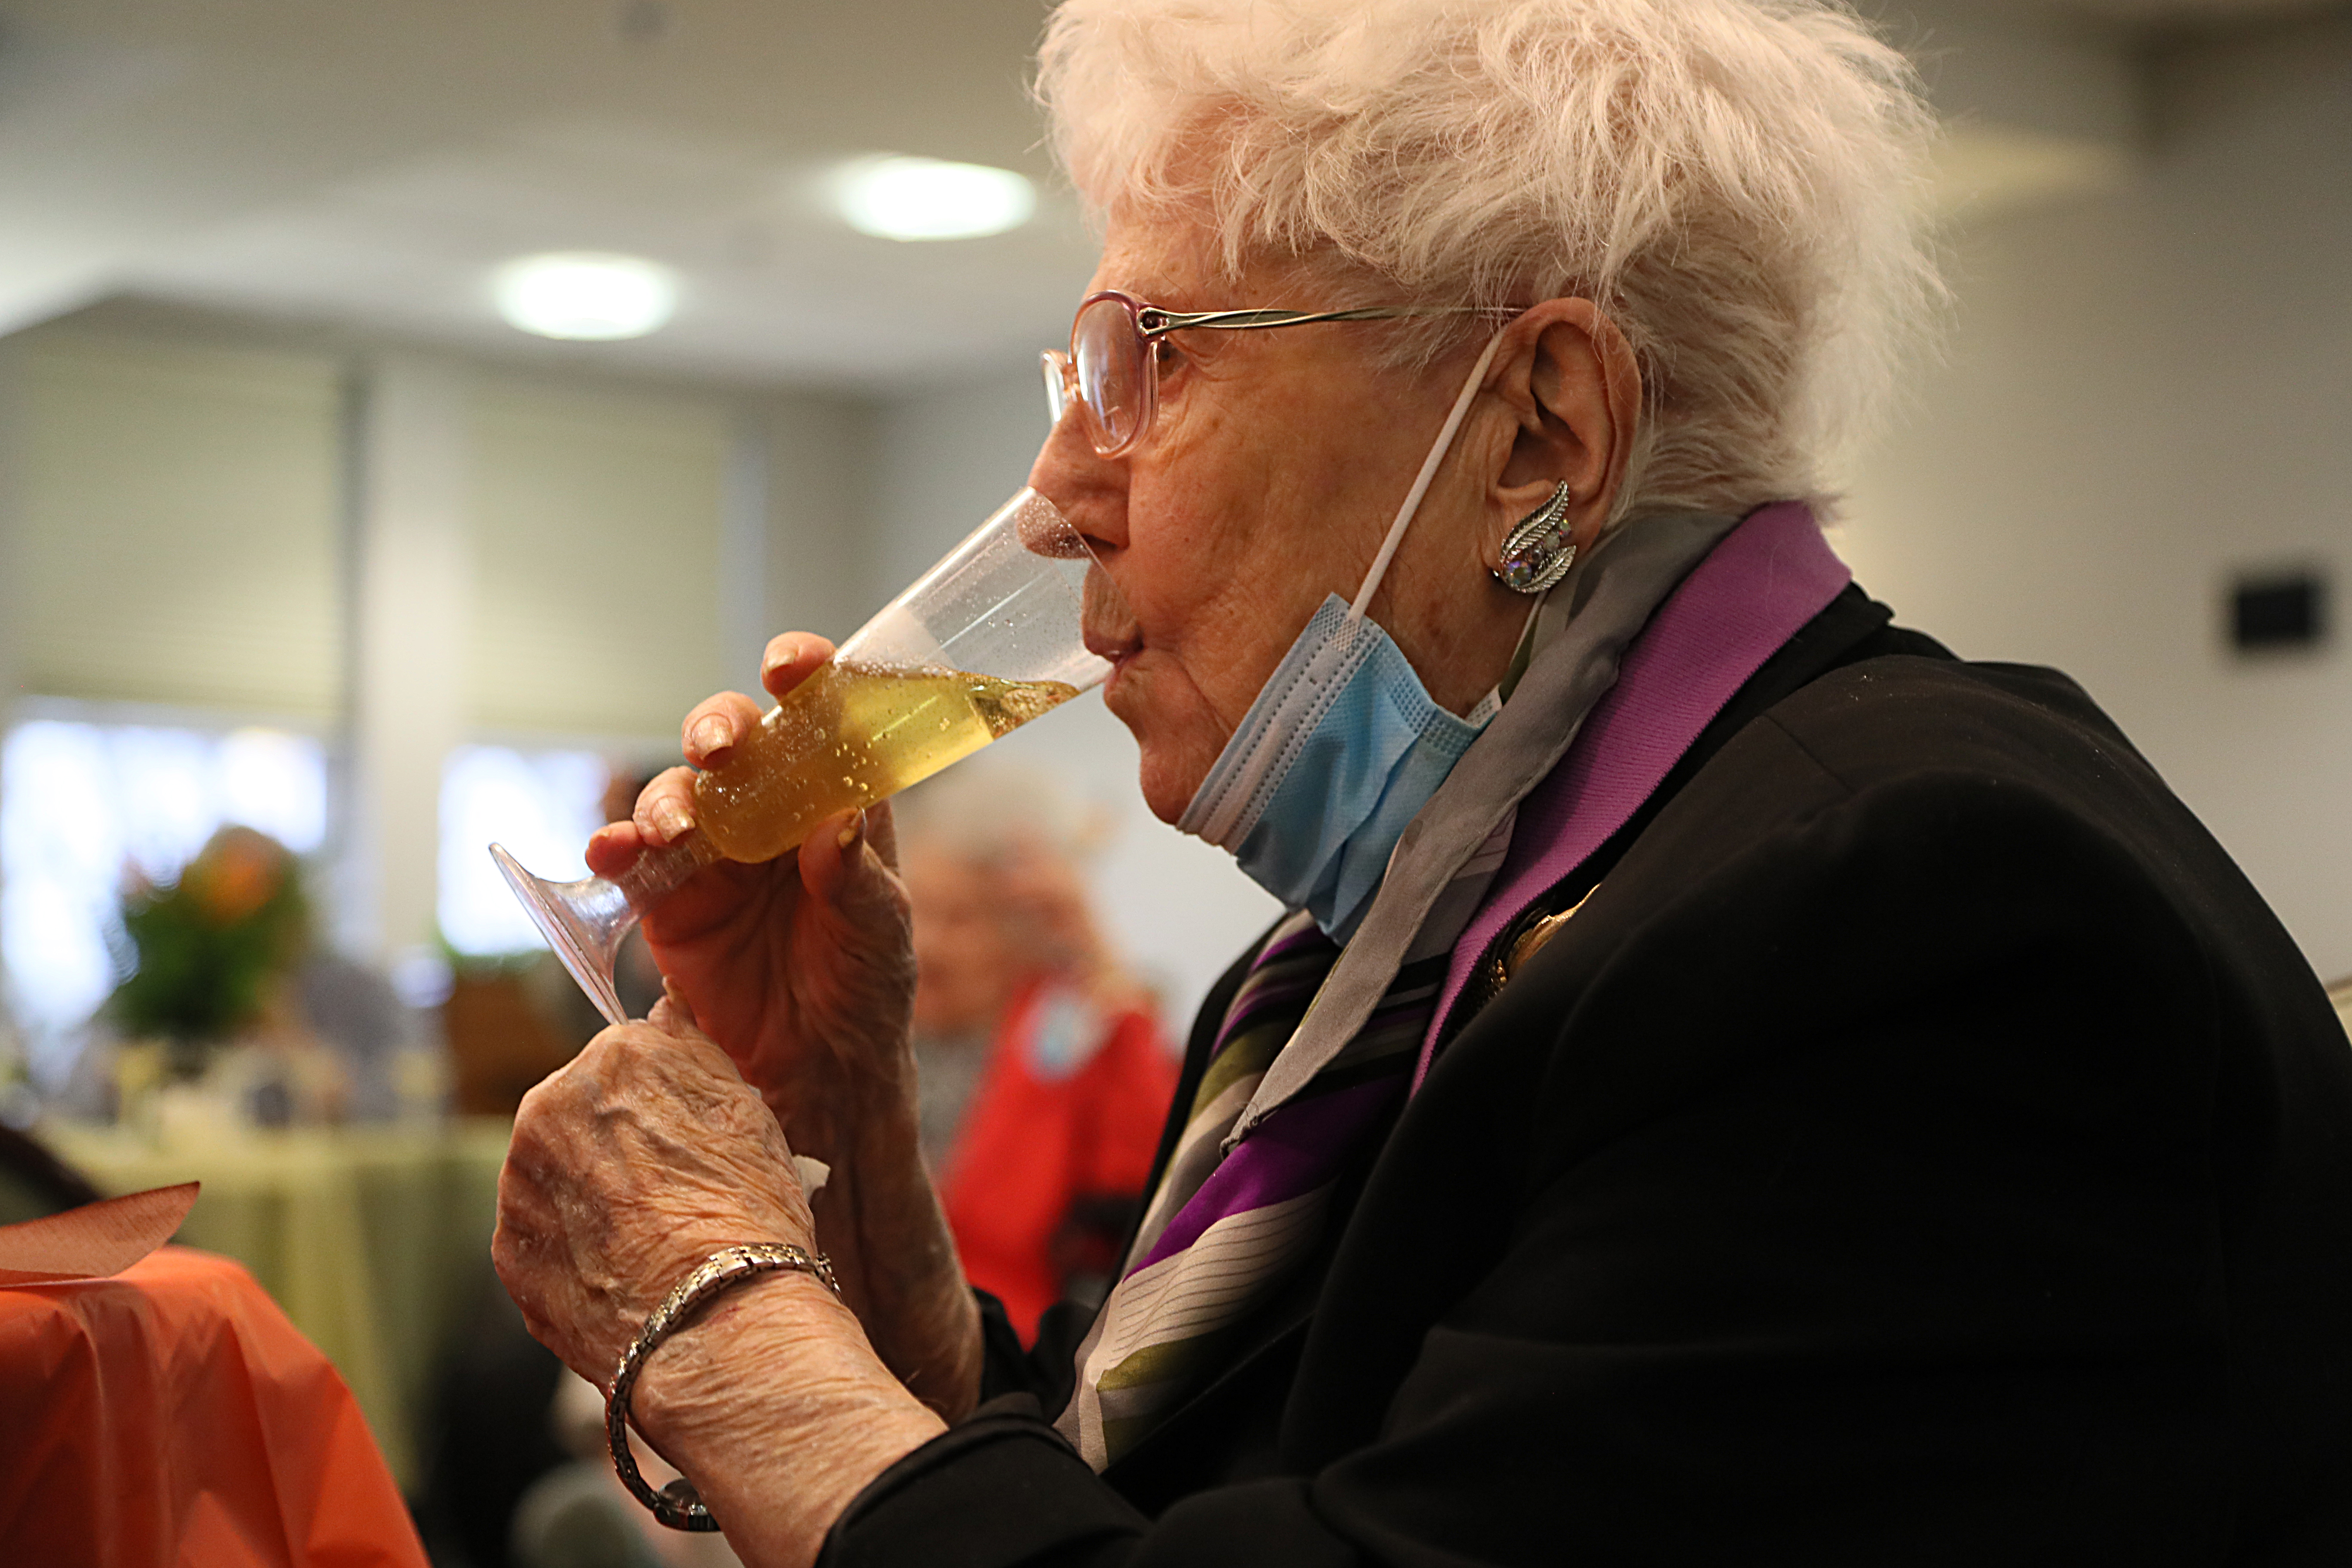 Thelma Tayor, 100, enjoyed sparkling cider during the party.  